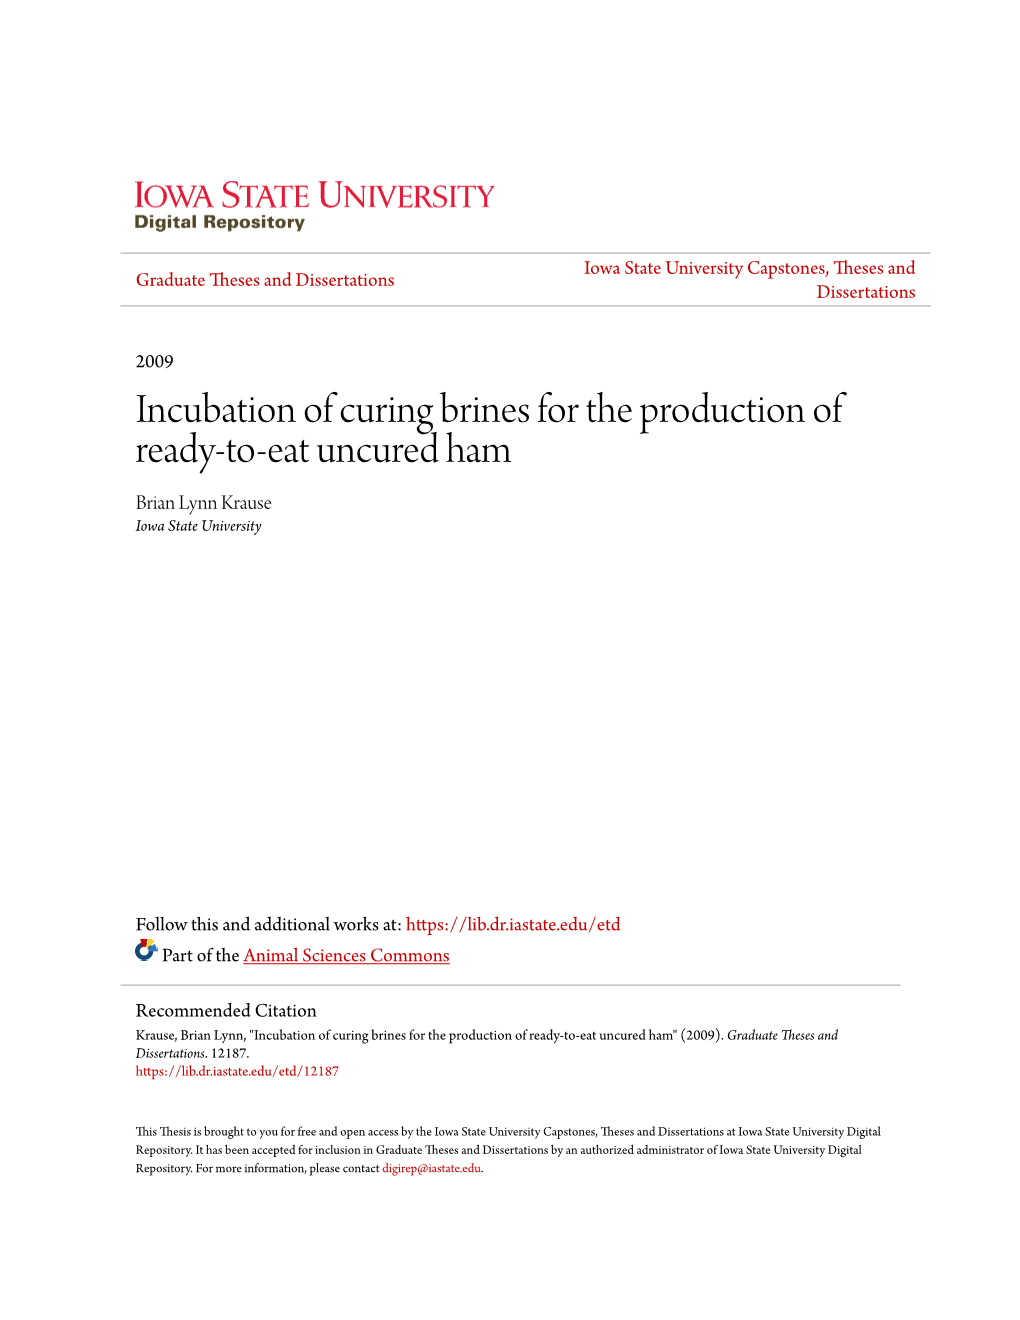 Incubation of Curing Brines for the Production of Ready-To-Eat Uncured Ham Brian Lynn Krause Iowa State University